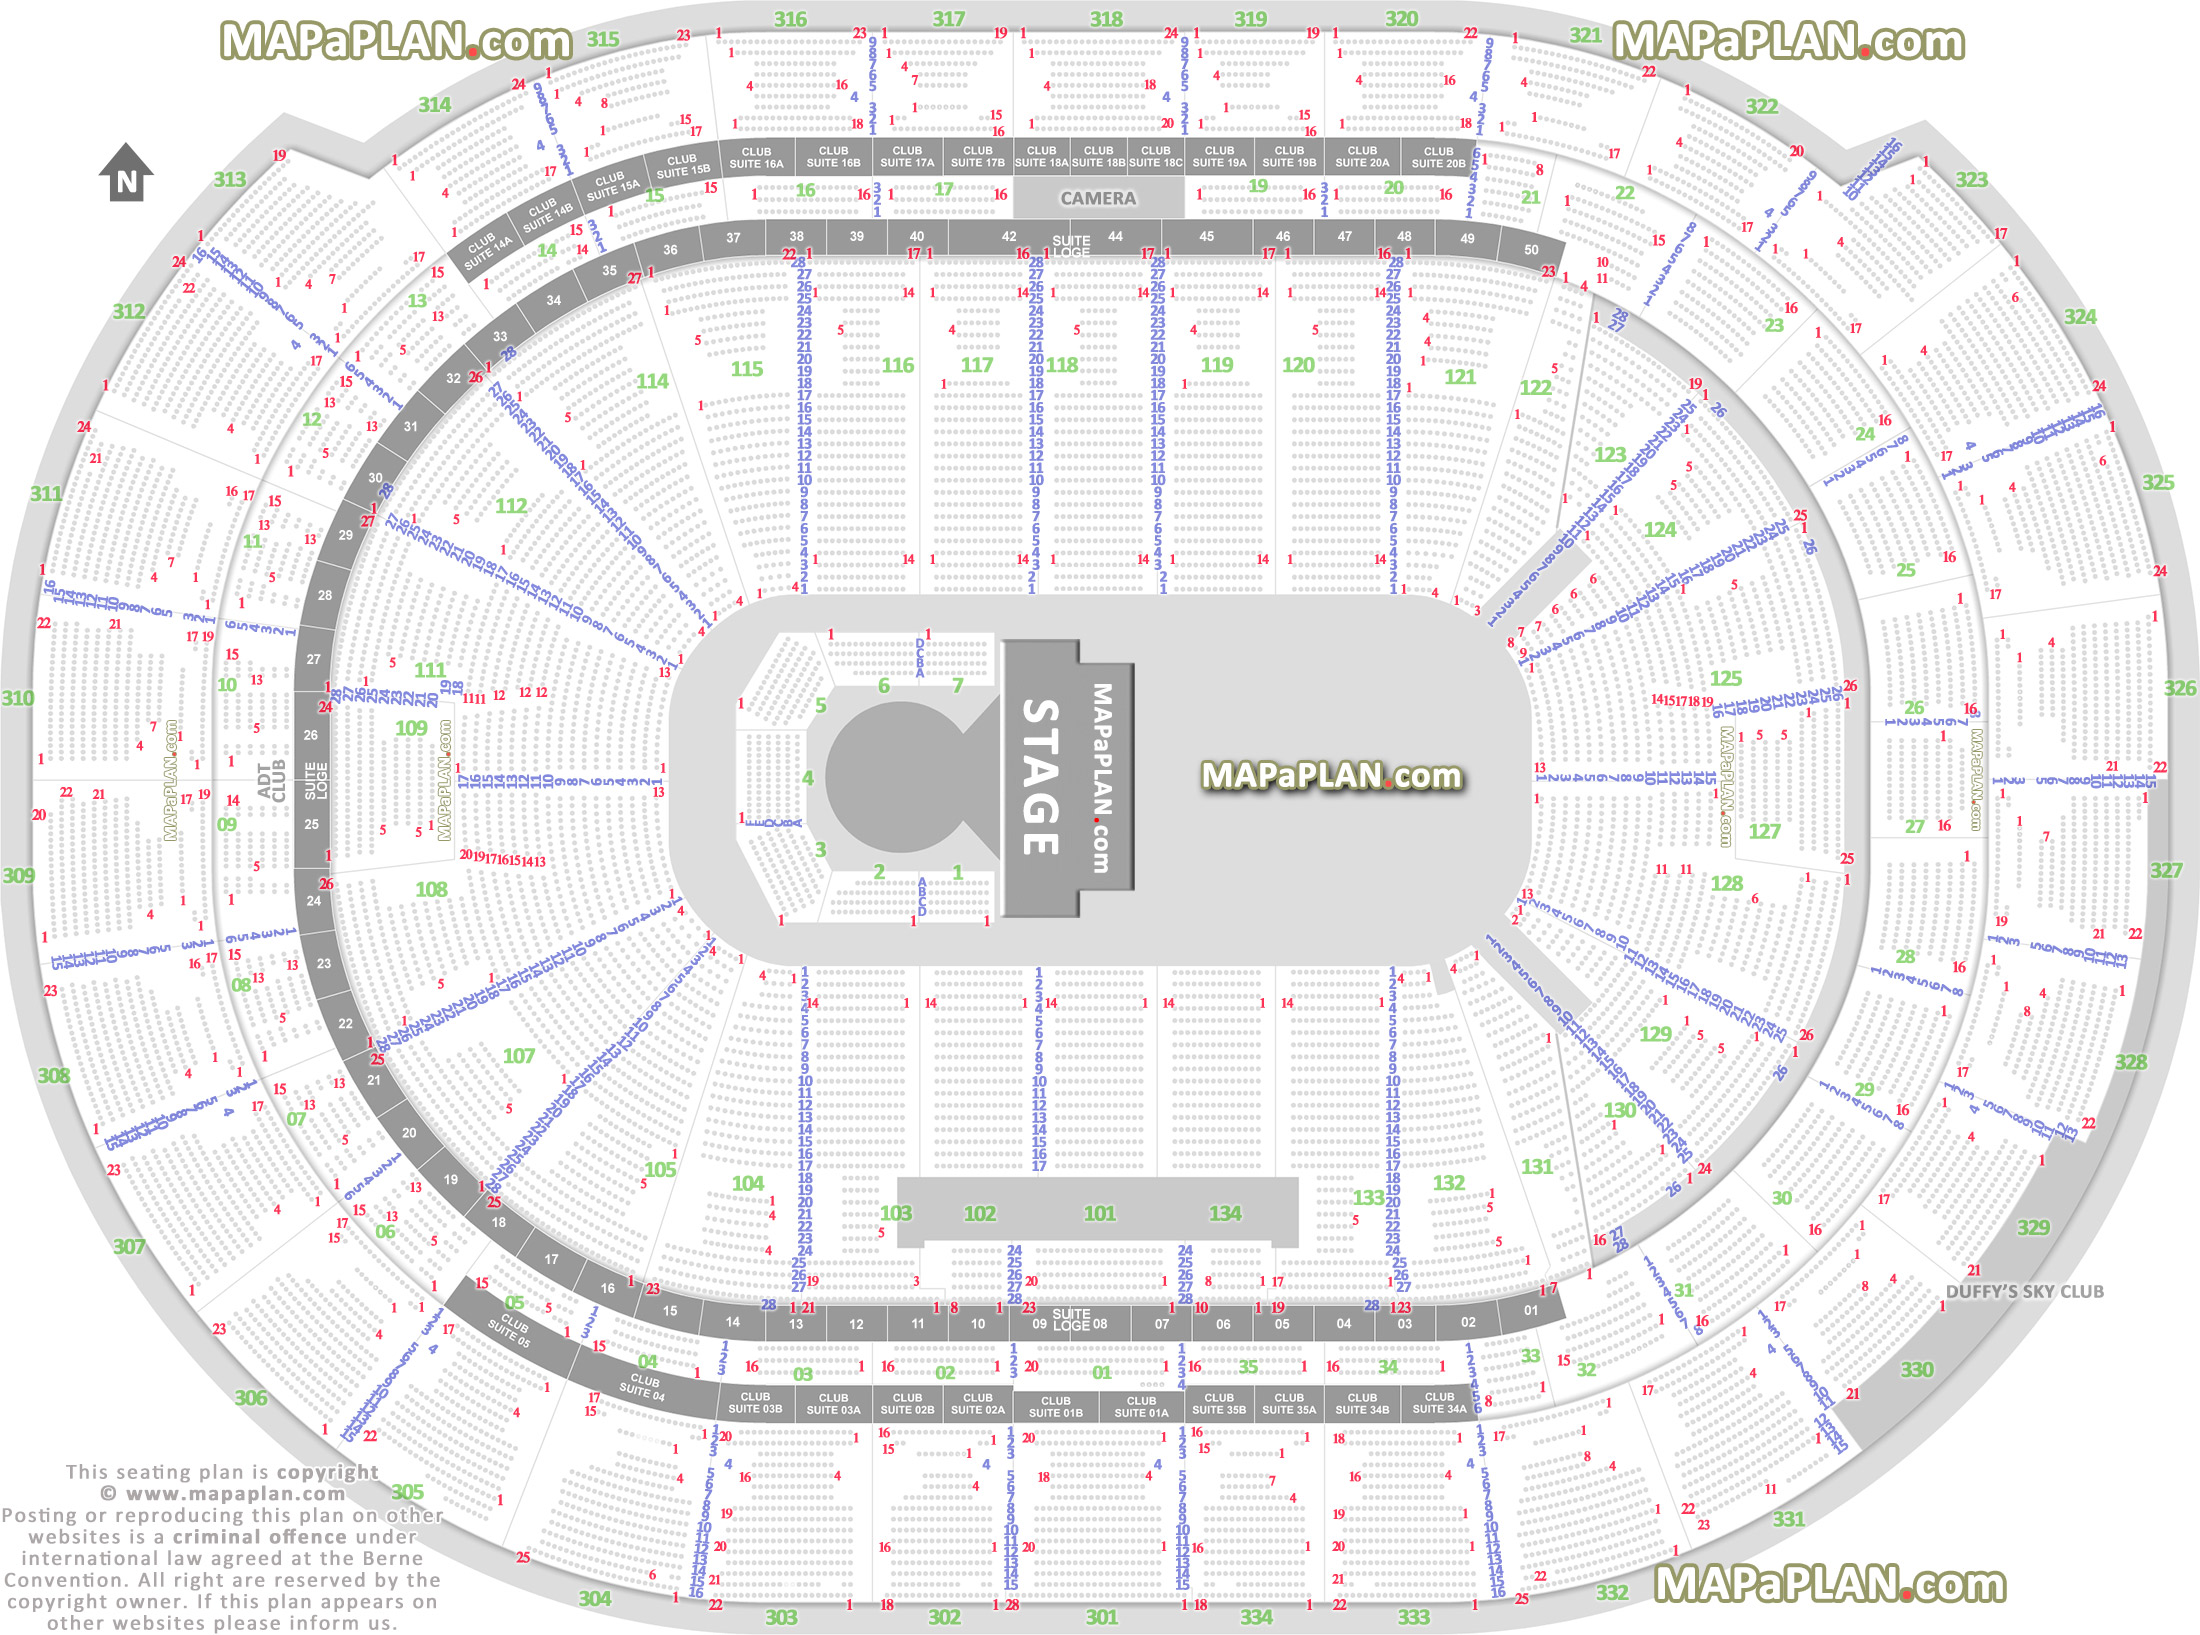 circus cirque du soleil exact seating map how many seats row private loge suite boxes Sunrise FLA Live Arena seating chart